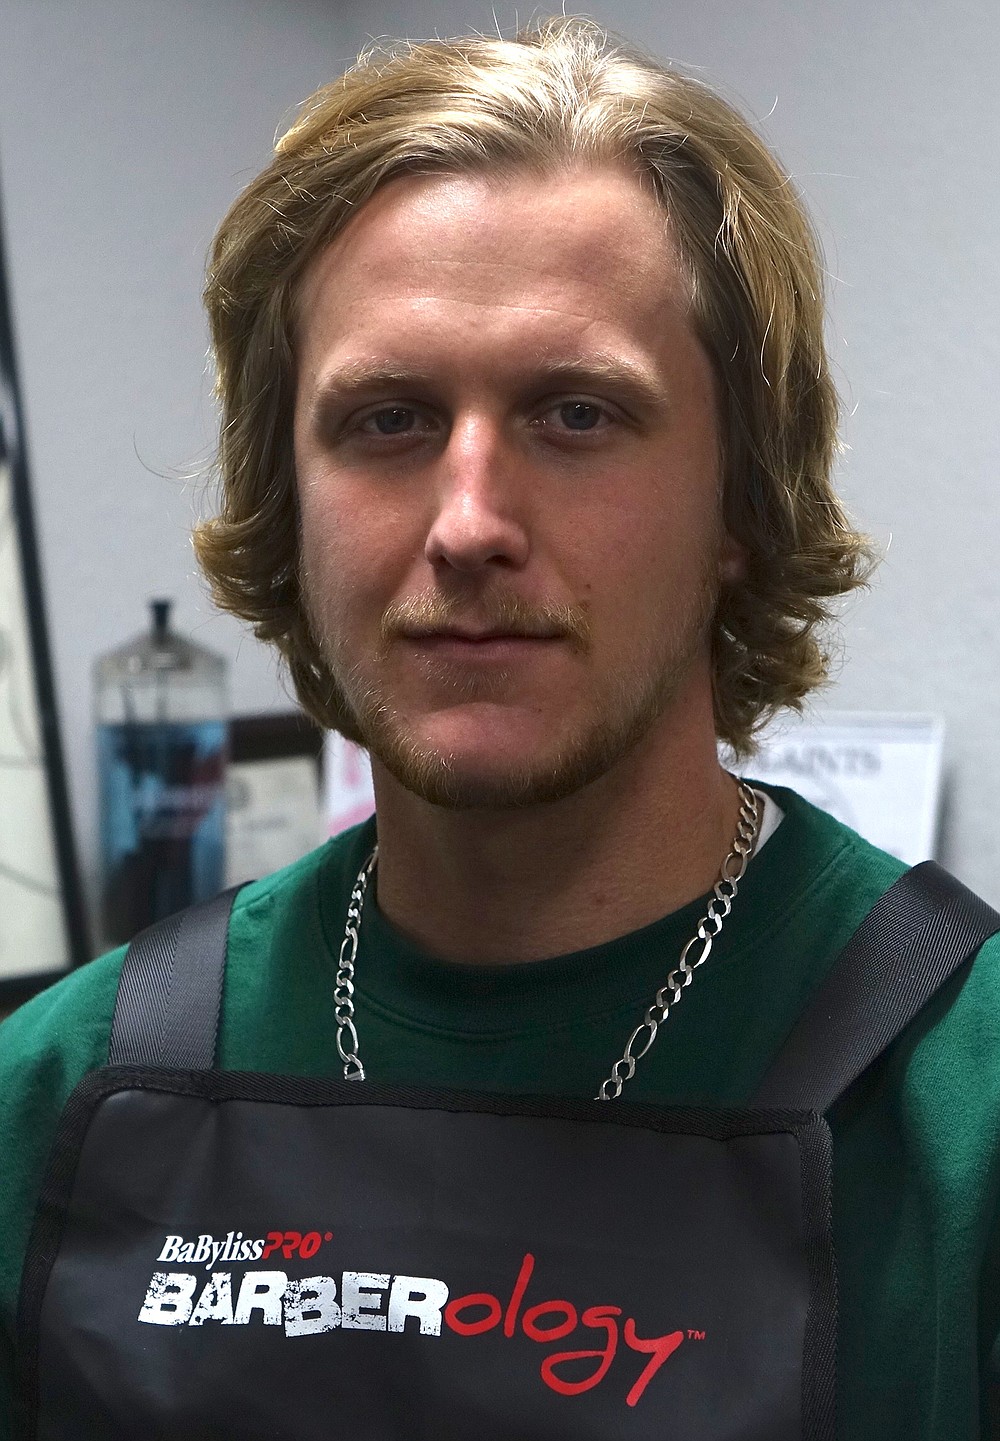 Clayton James may barber other people’s hair, but he’s currently letting his own grow long. “Part of my new personality,” the new barber says.